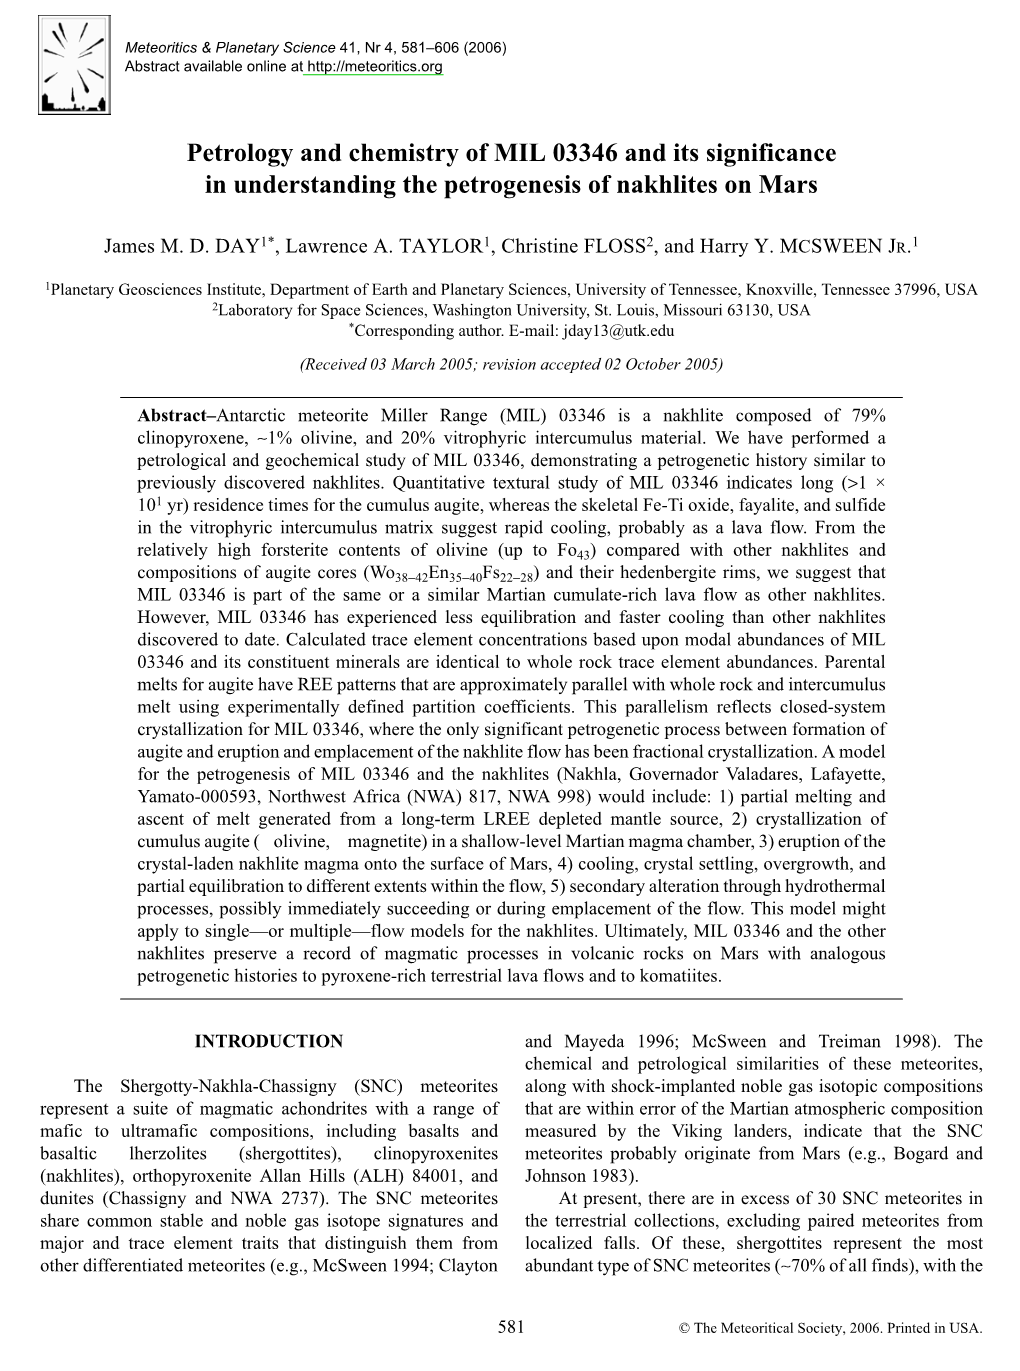 Petrology and Chemistry of MIL 03346 and Its Significance in Understanding the Petrogenesis of Nakhlites on Mars